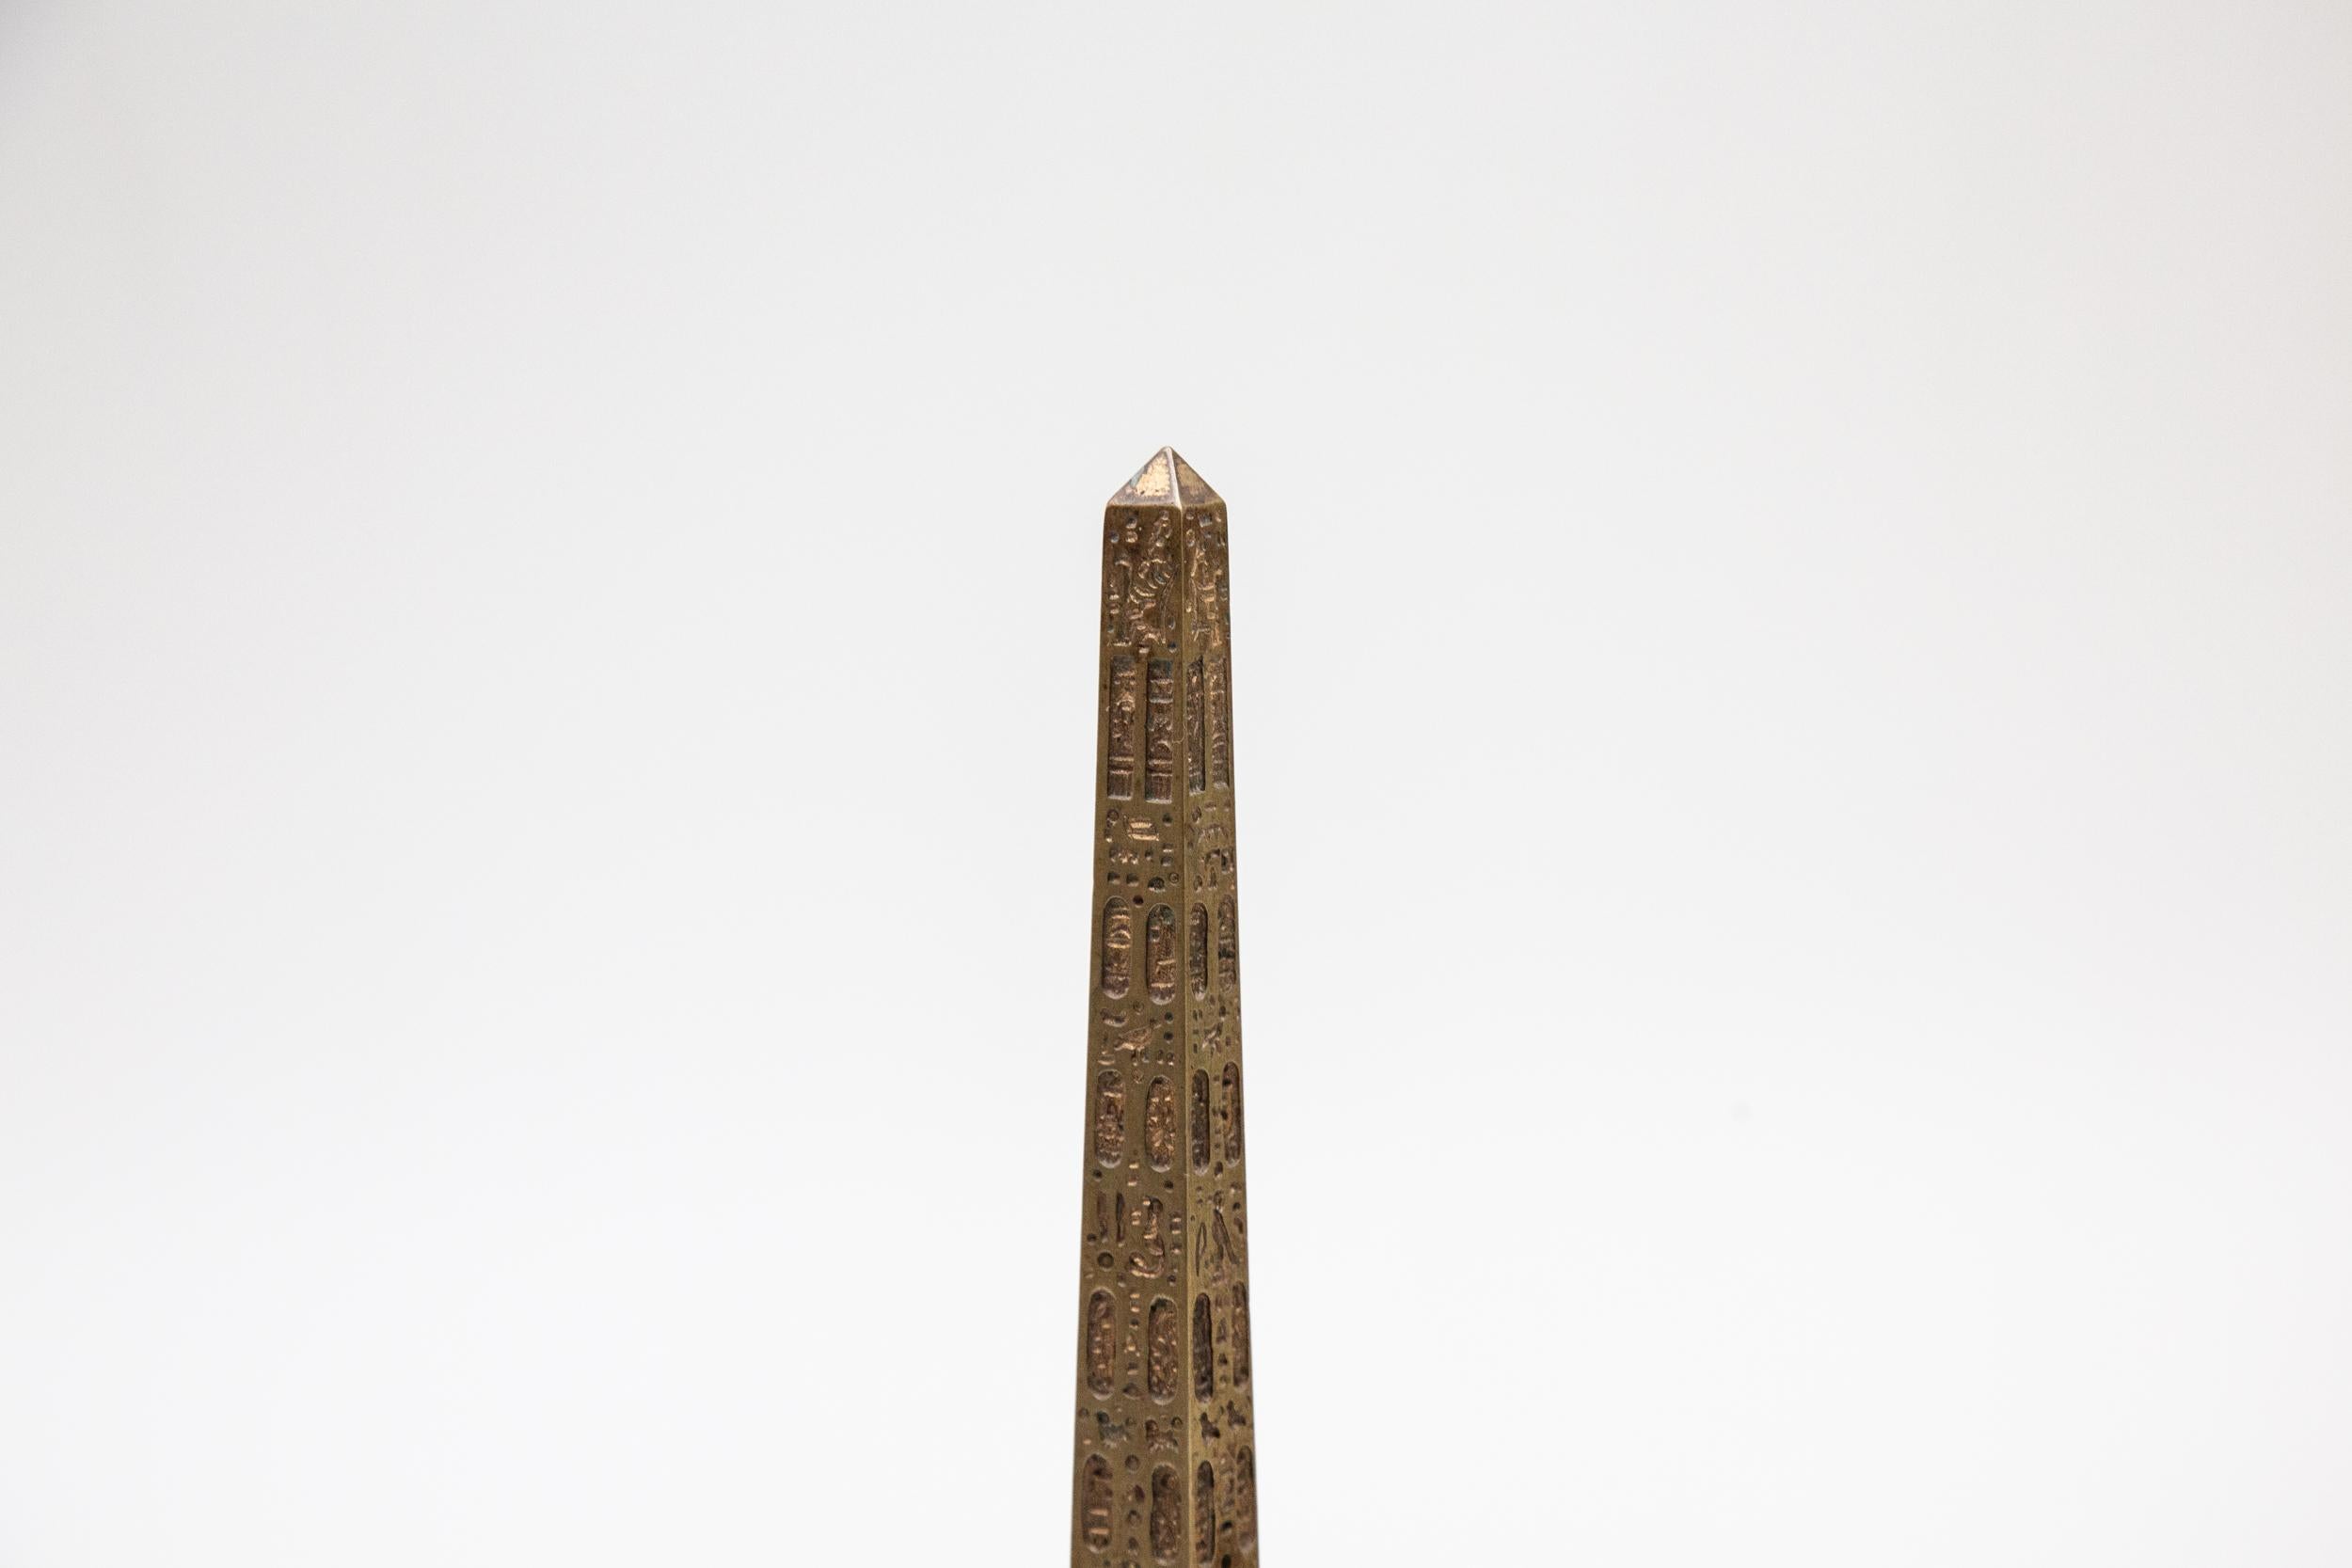 Grand Tour Souvenir Model of Luxor Obelisk mounted on a dark red marble base. The Luxor Obelisks are two ancient Egyptian obelisks carved to stand either side of the portal of the Luxor Temple in the reign of Ramesses II. The left obelisk remains in